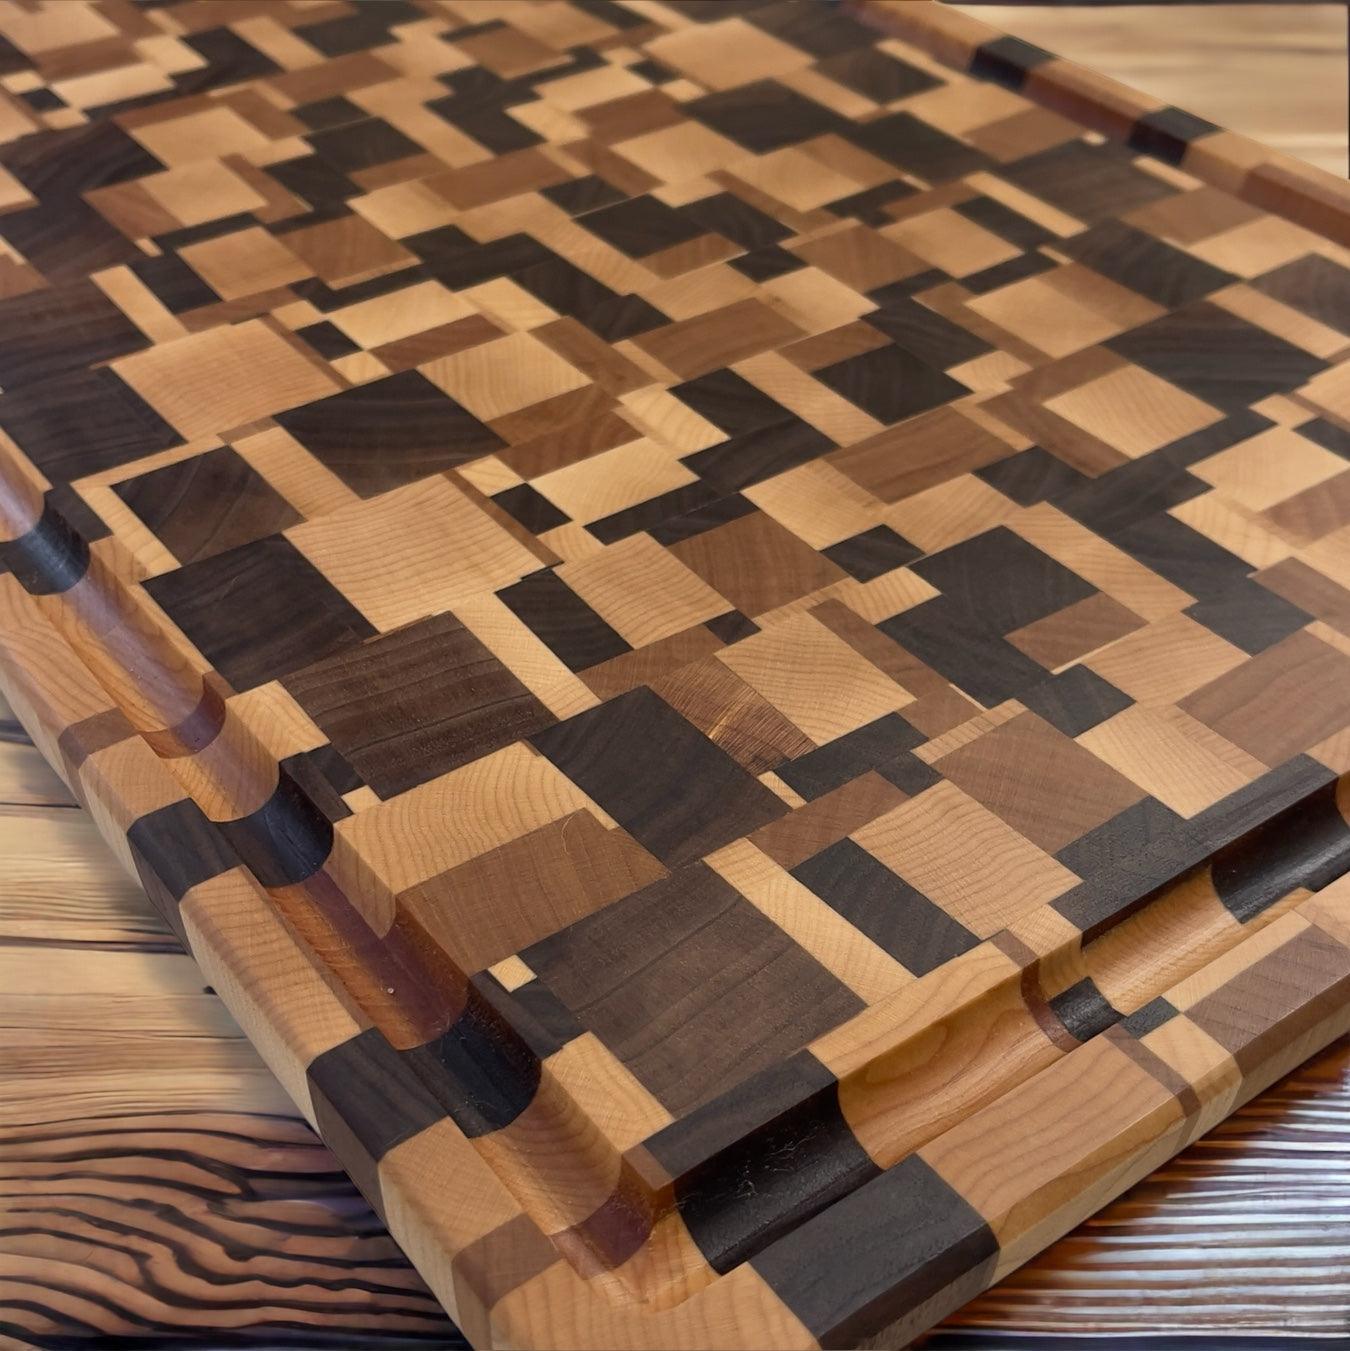 End Grain Chaos Butcher Block - We have the wood